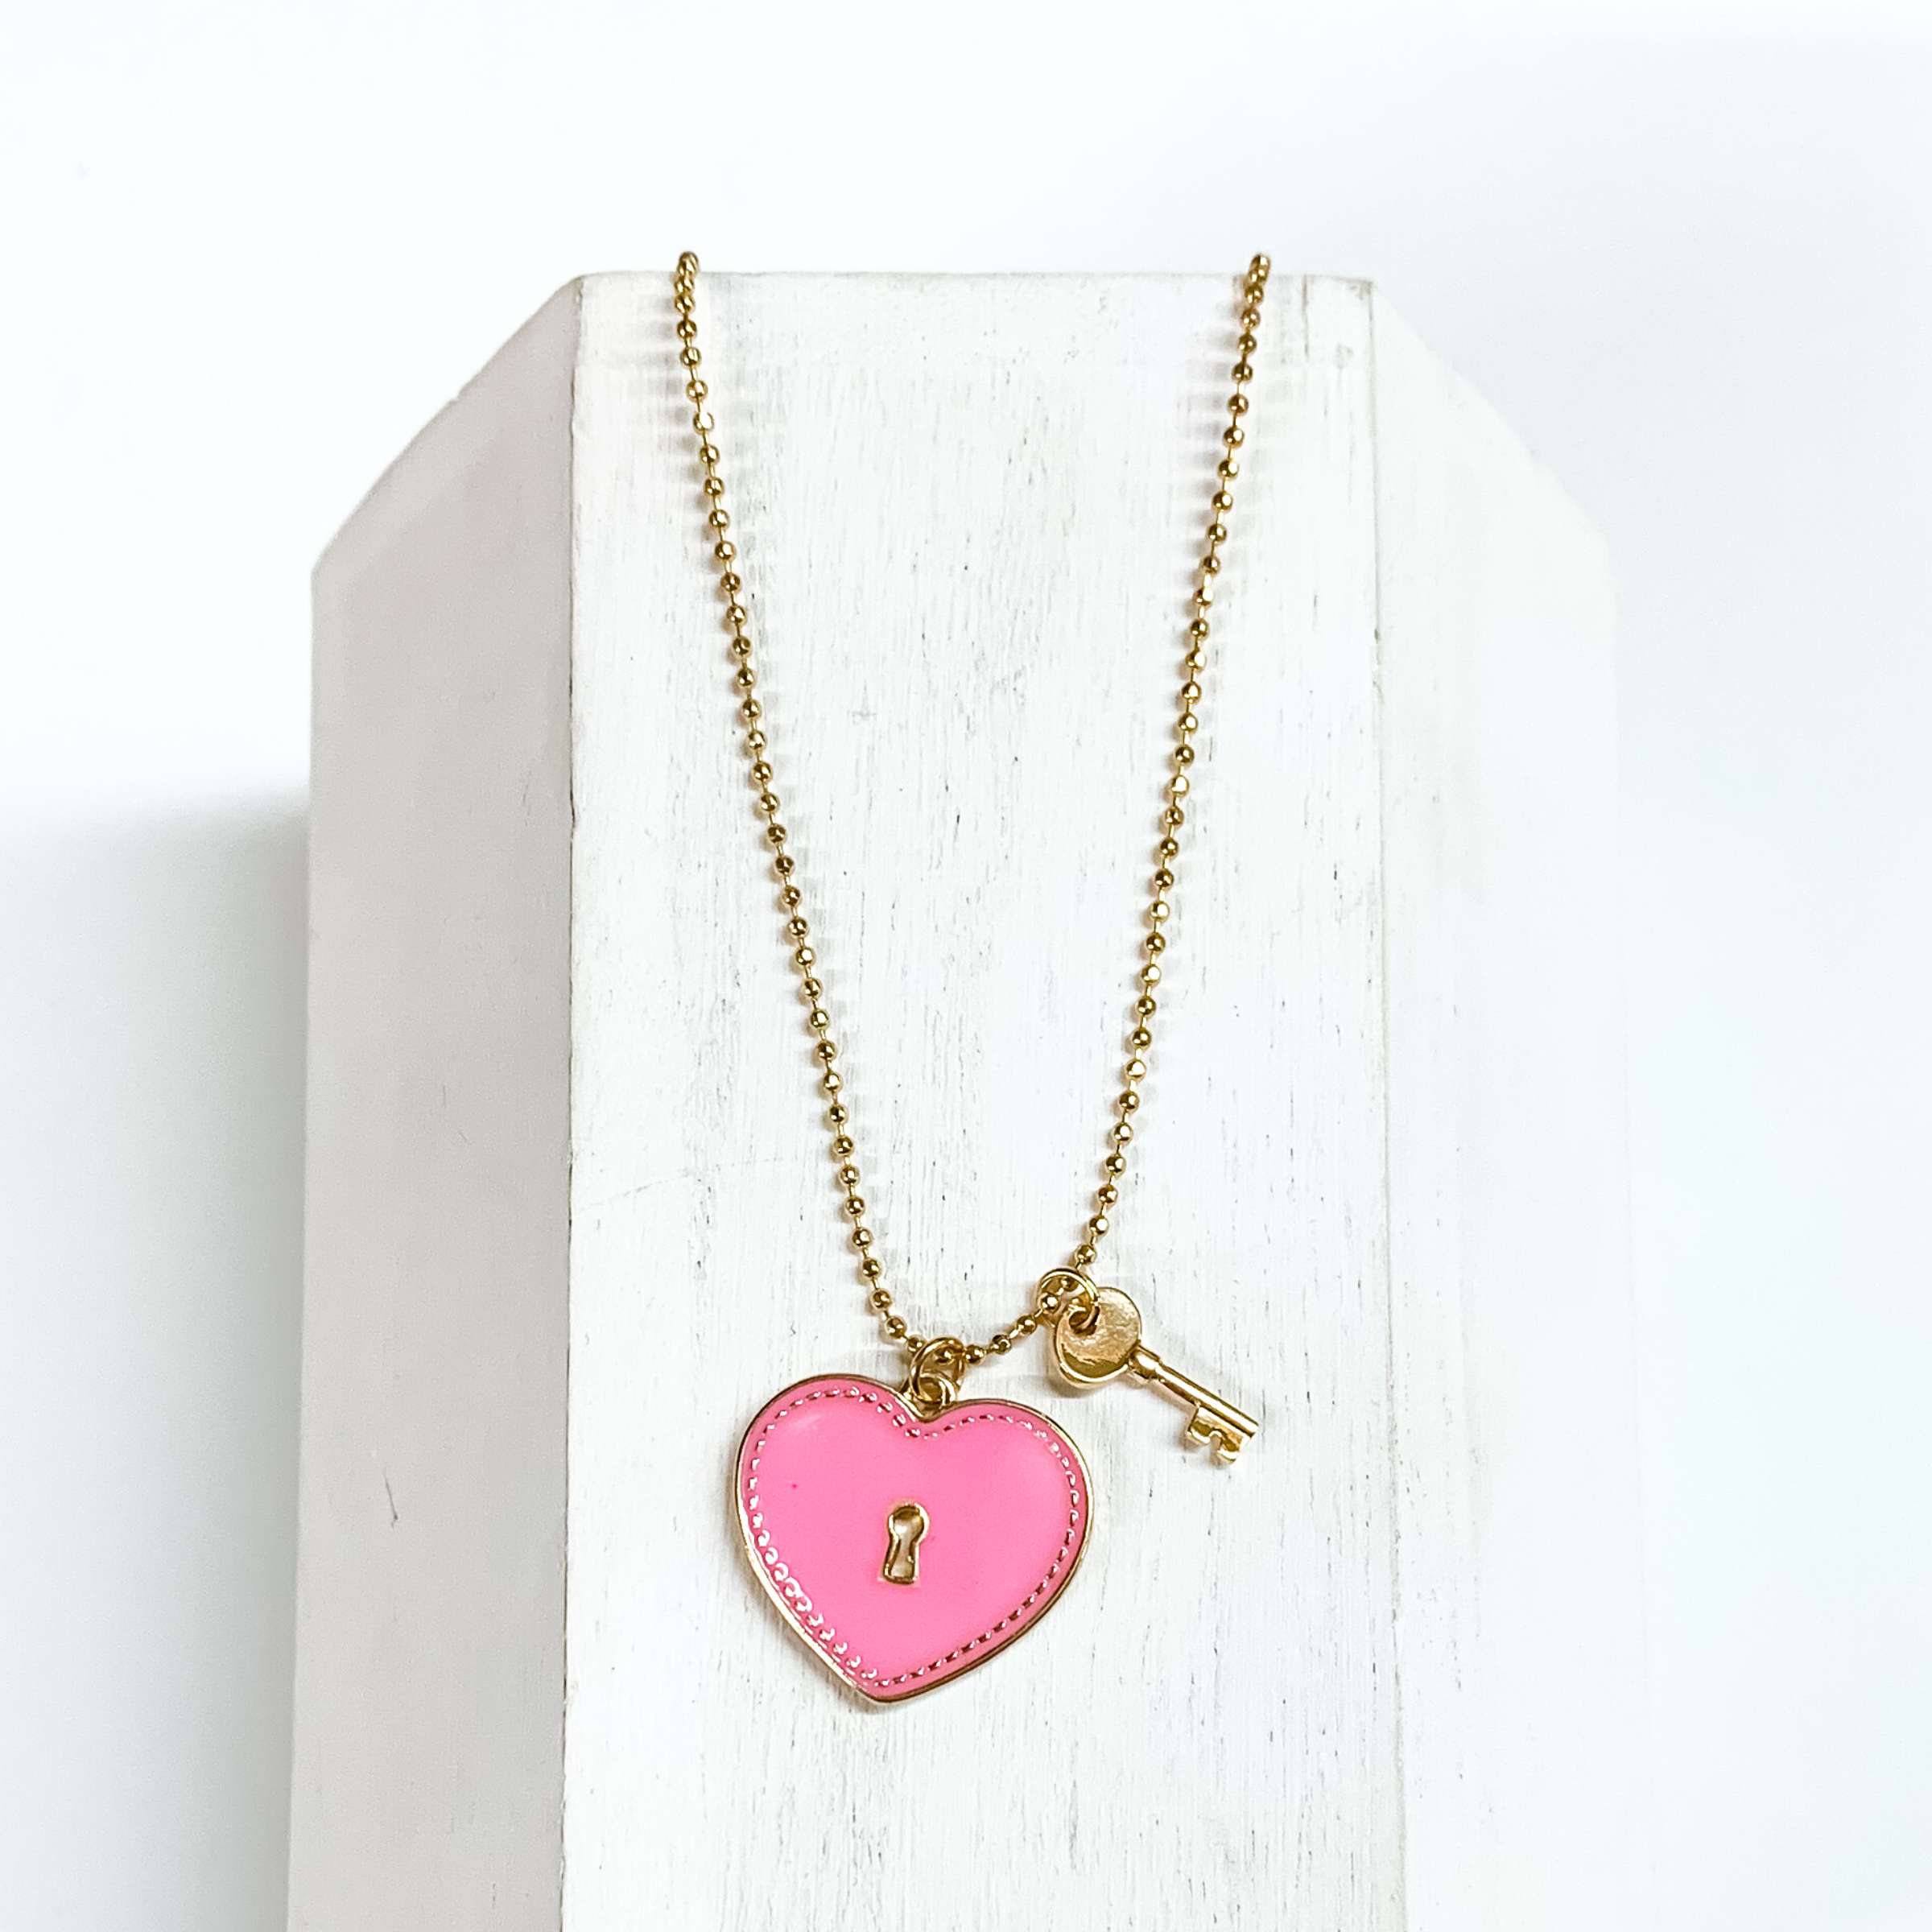 Gold, ball chain necklace with a light pink heart pendant and gold key charm. This necklace is pictured on a white block on a white background. 